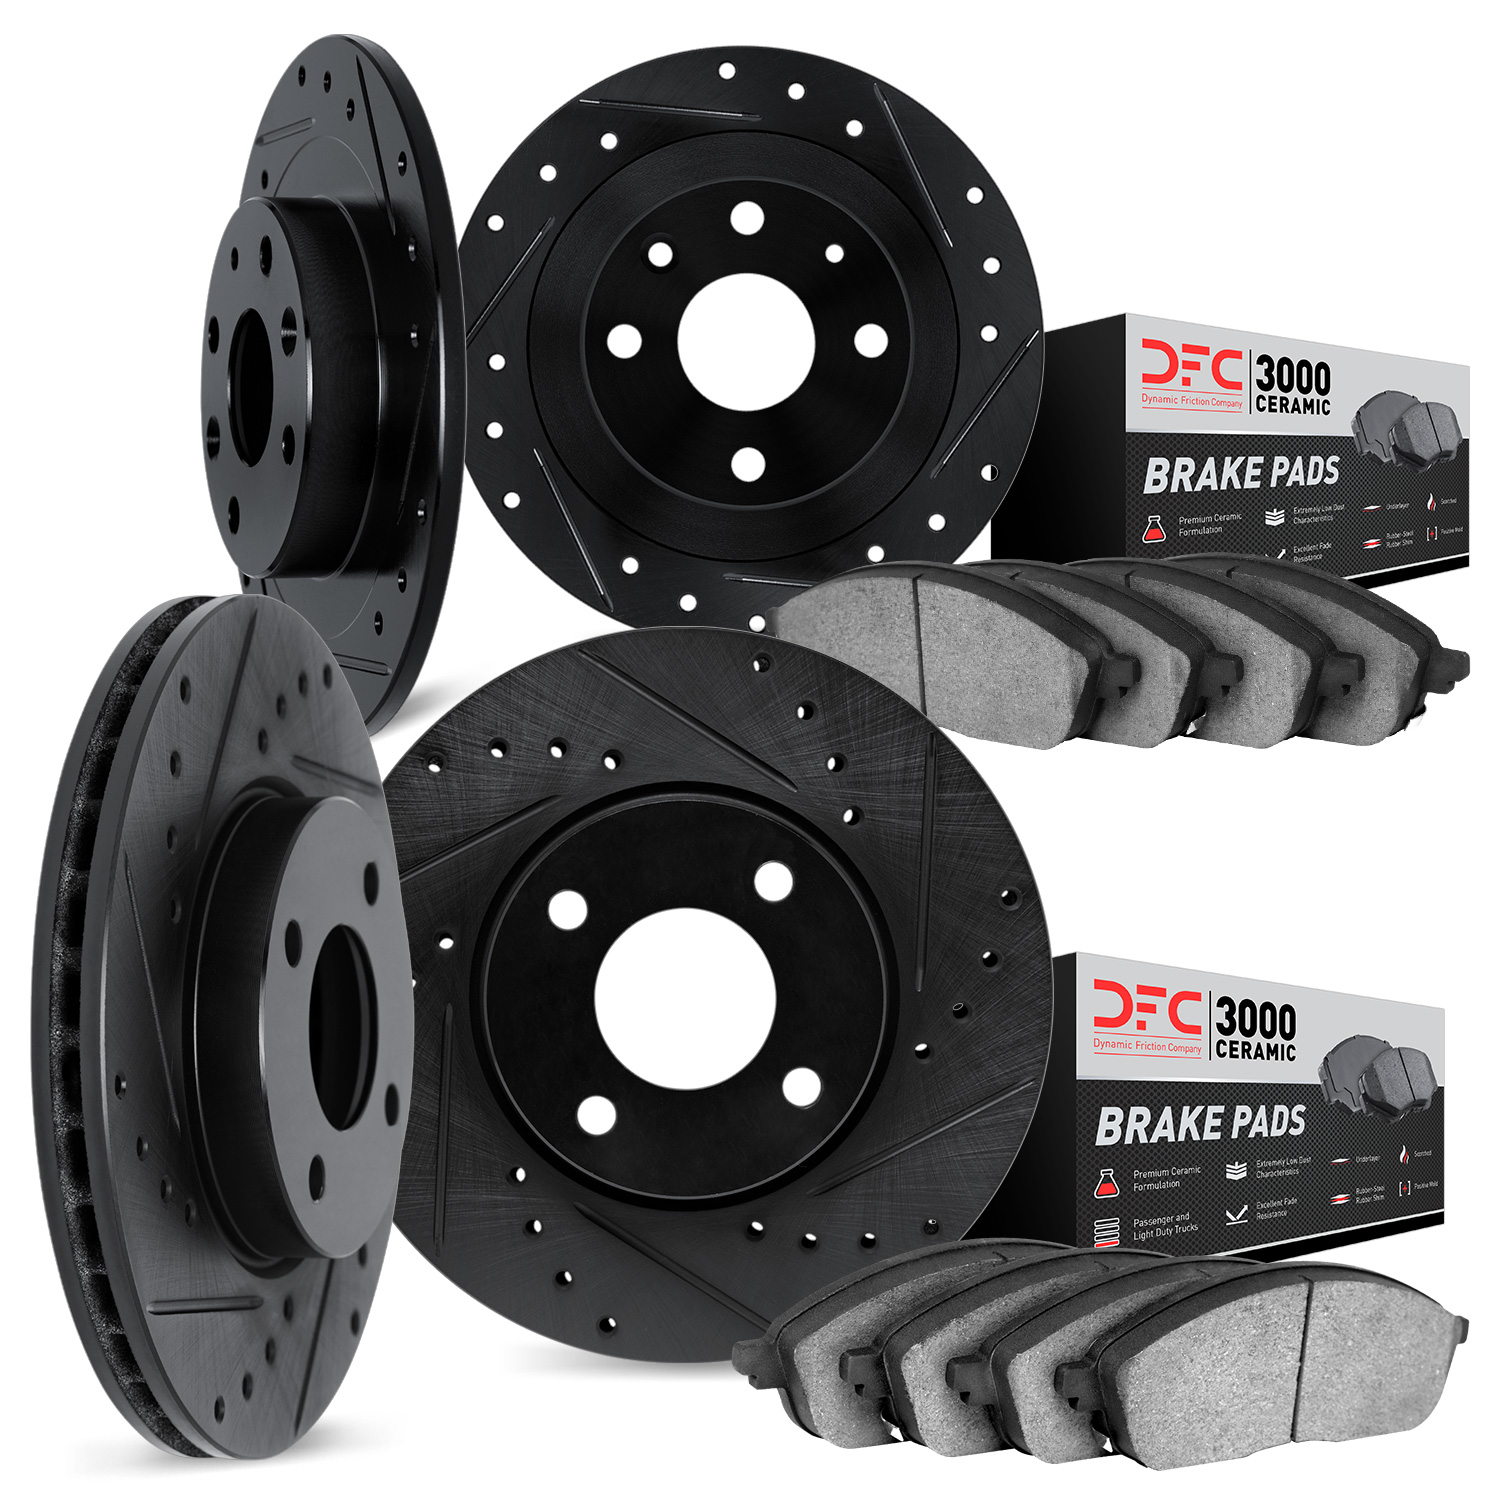 8304-07006 Drilled/Slotted Brake Rotors with 3000-Series Ceramic Brake Pads Kit [Black], 2012-2019 Mopar, Position: Front and Re